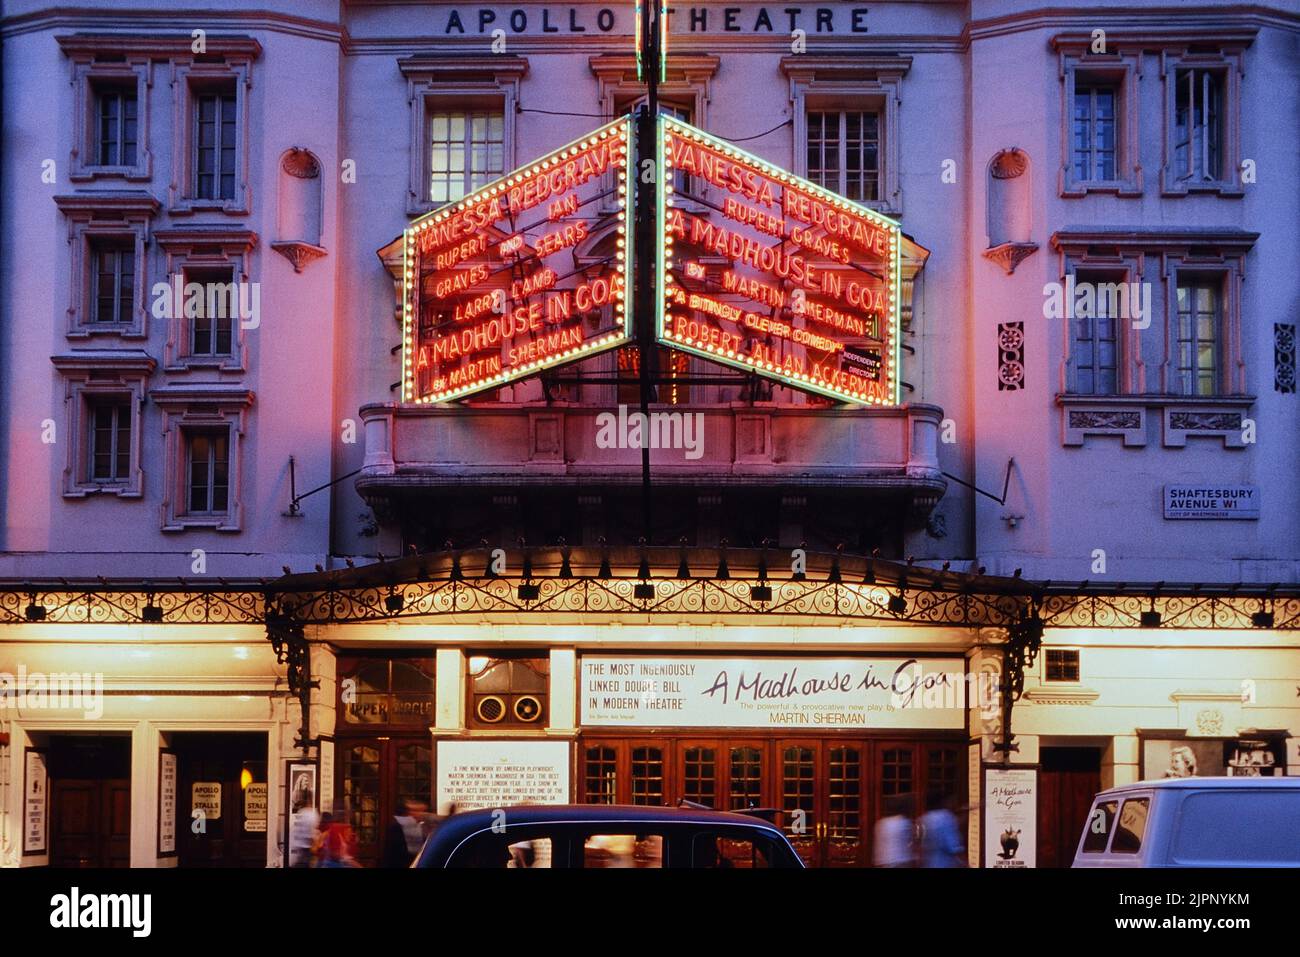 West End production of the play A Madhouse in Goa (by Martin Sherman), at the Apollo theatre (Shaftesbury Avenue), London. UK. Circa 1989 Stock Photo